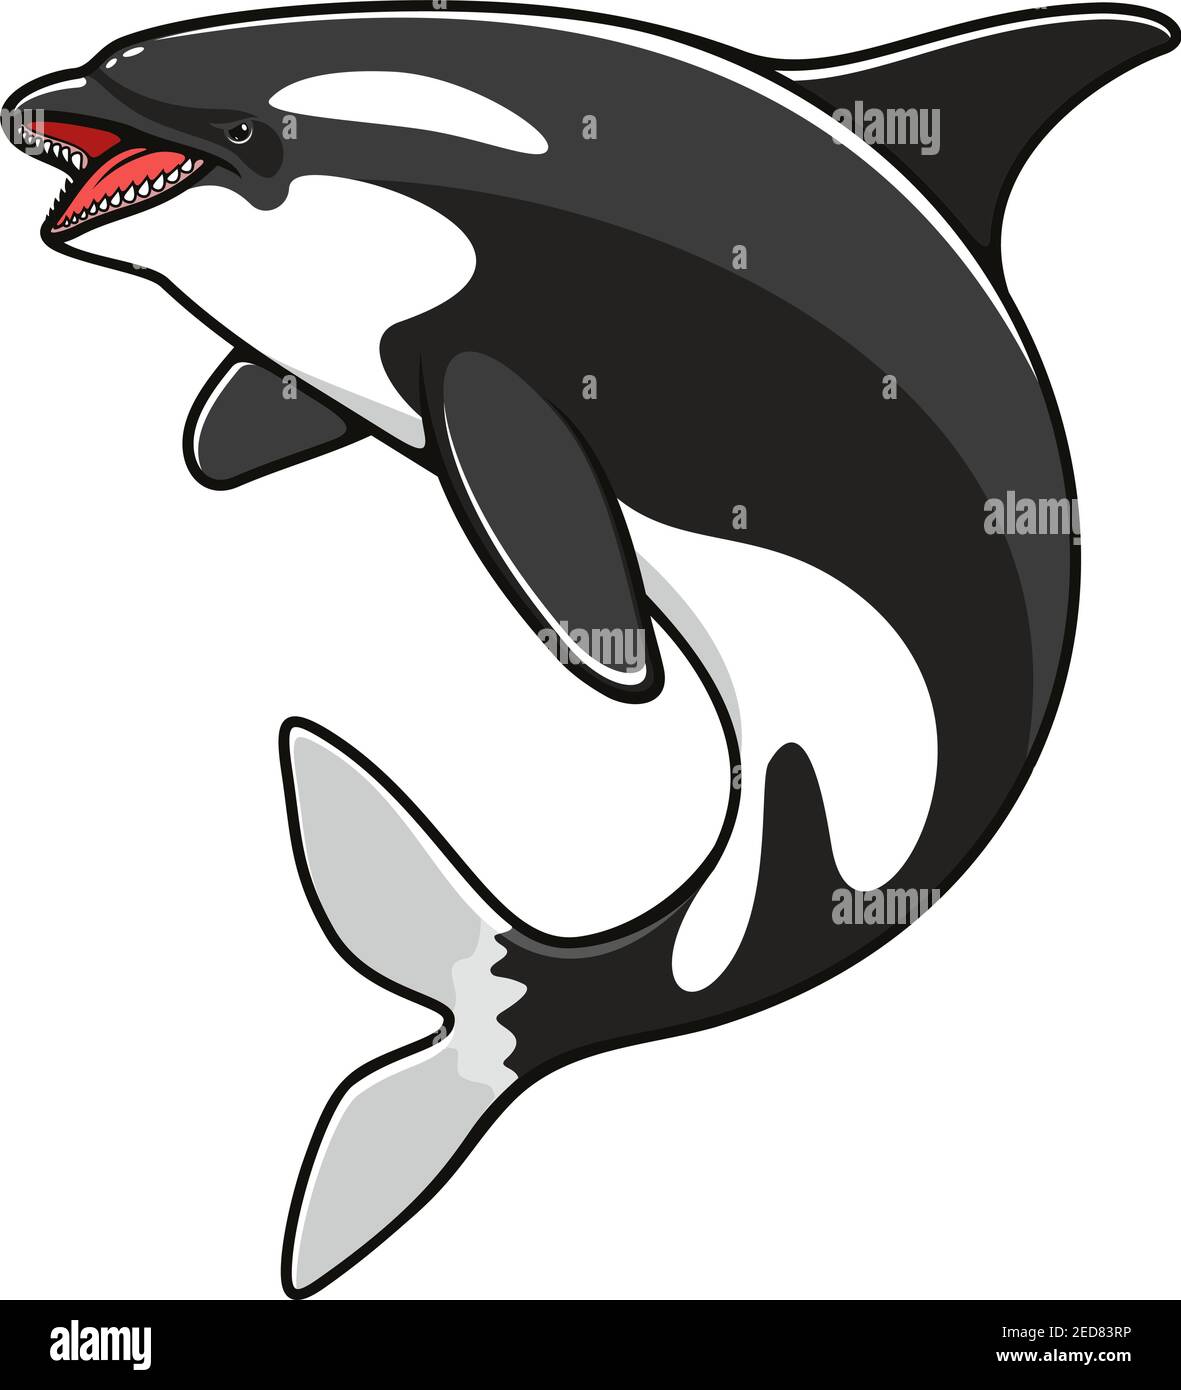 Orca or killer whale, grampus fish symbol. Marine or nautical mammal, big underwater animal and creature with teeth jumping over, swimming predator. S Stock Vector